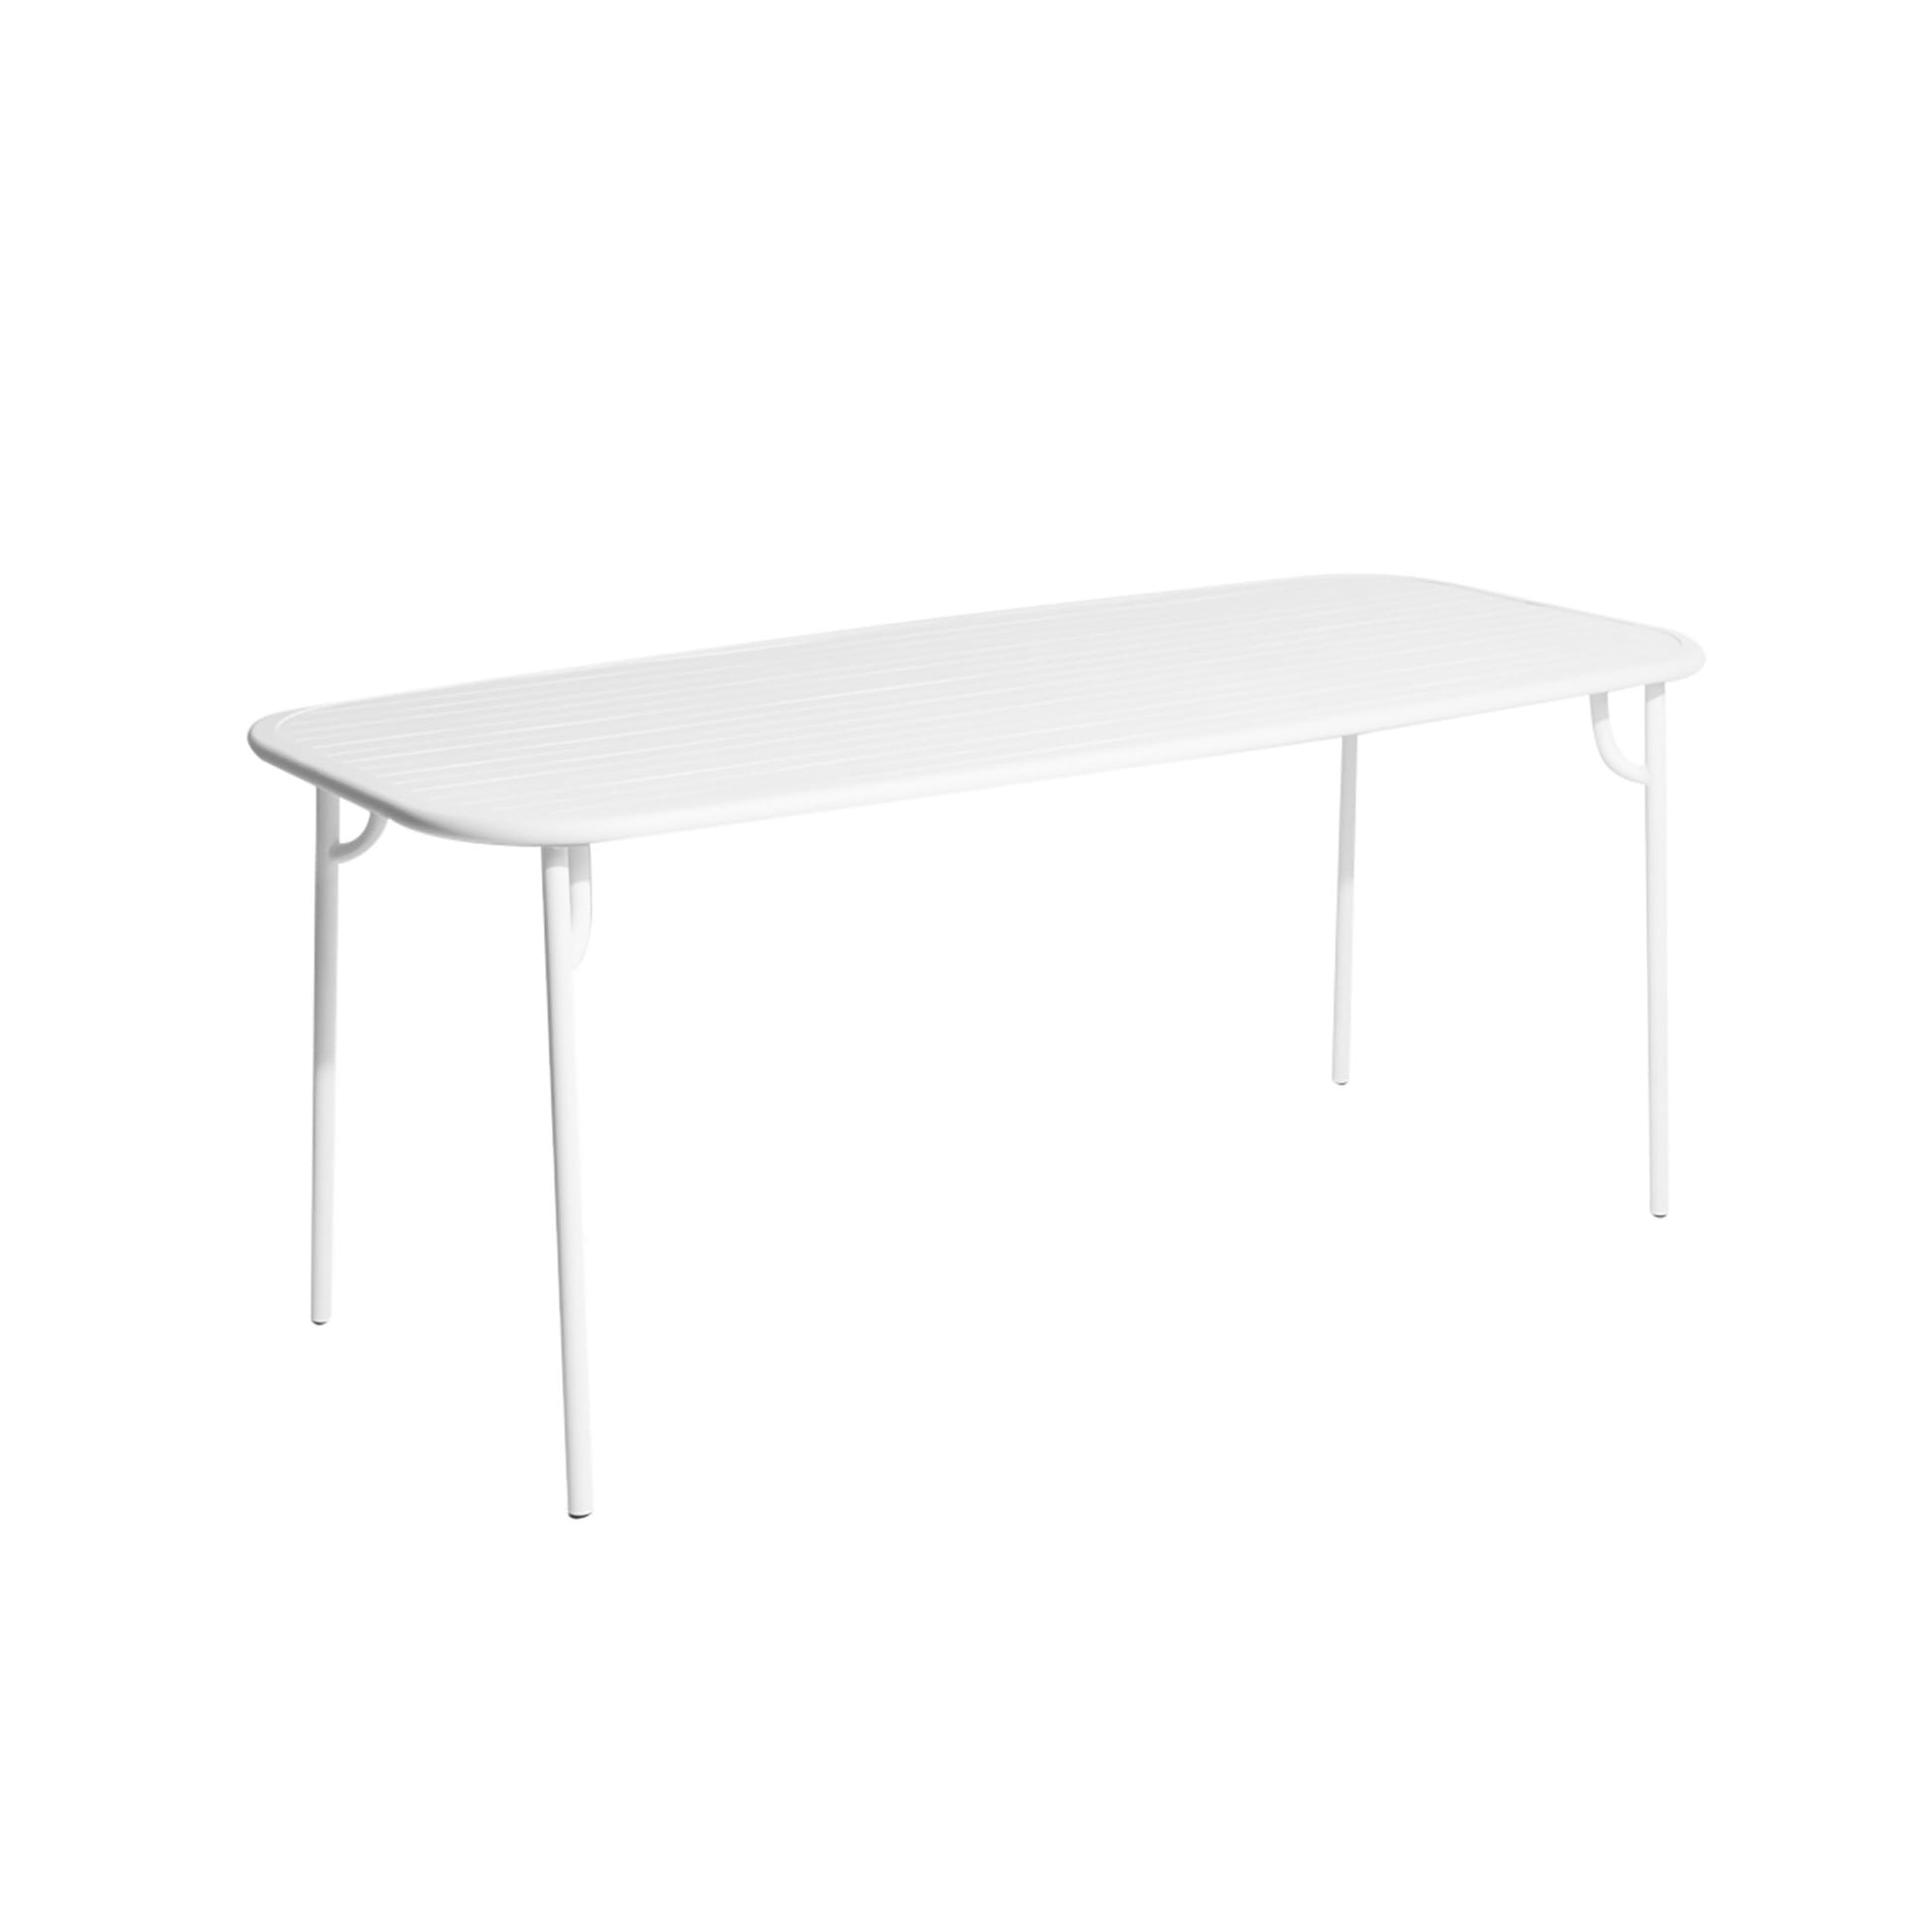 WEEK-END Rectangular Table by Petite Friture #White